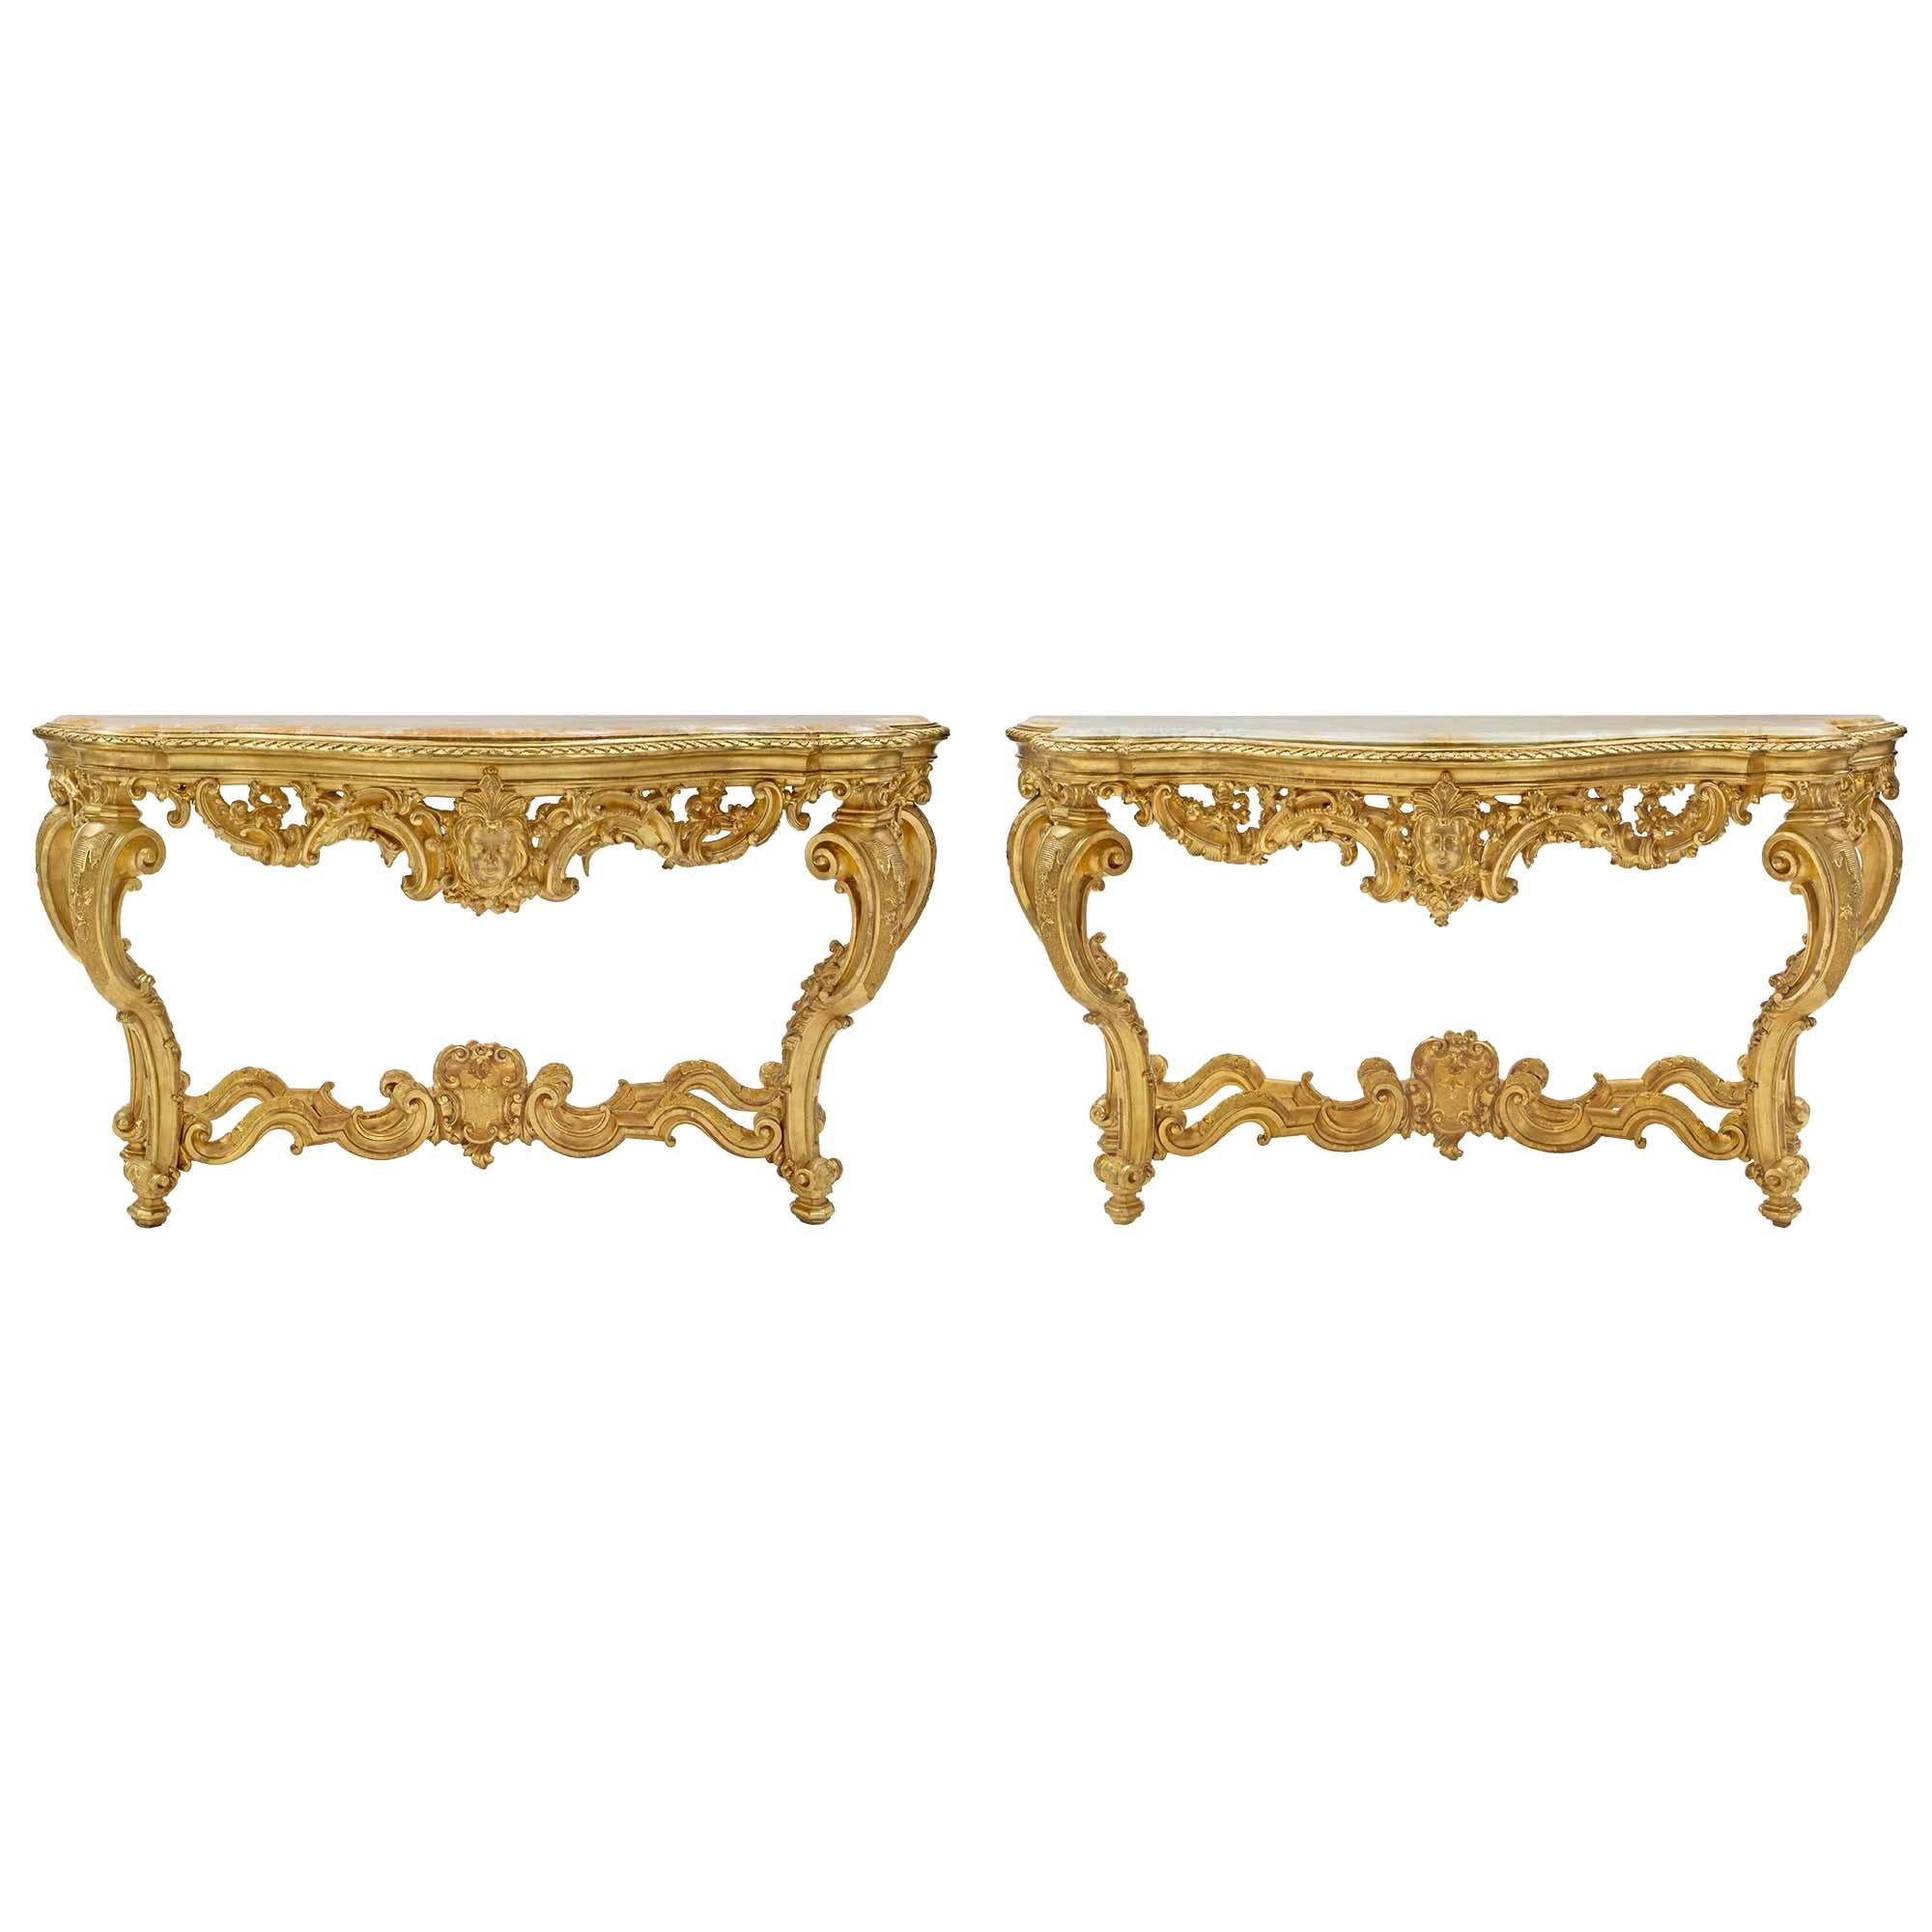 A spectacular and monumental French early 19th century Louis XV st. giltwood and marble consoles with their original palatial companion mirrors. Each console is raised by topie feet and elegant and richly carved scrolled legs, joined by an X